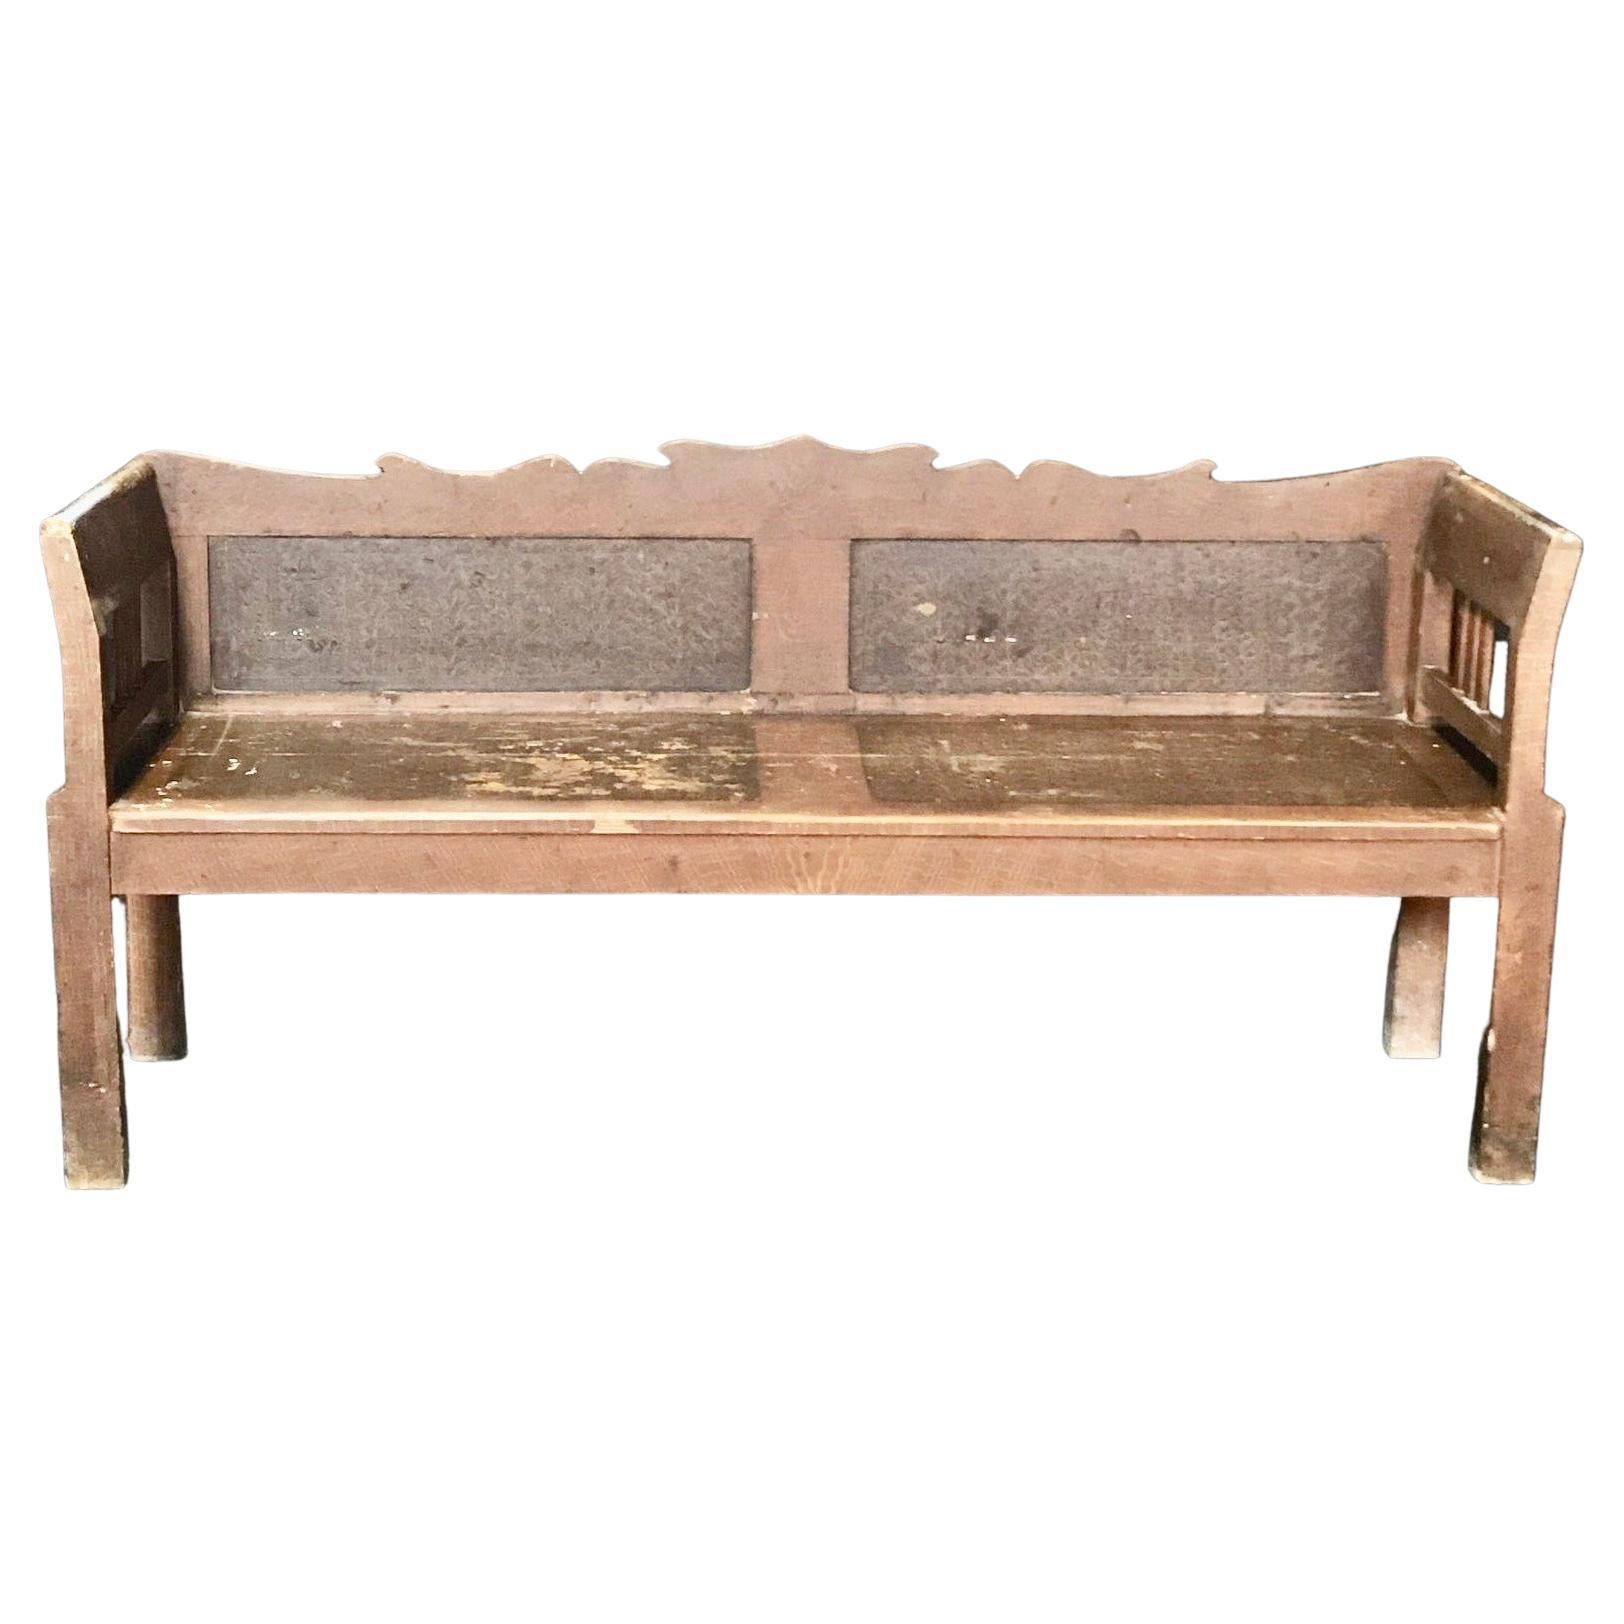 Rustic Antique Pine Faux Painted Sofa Bench 